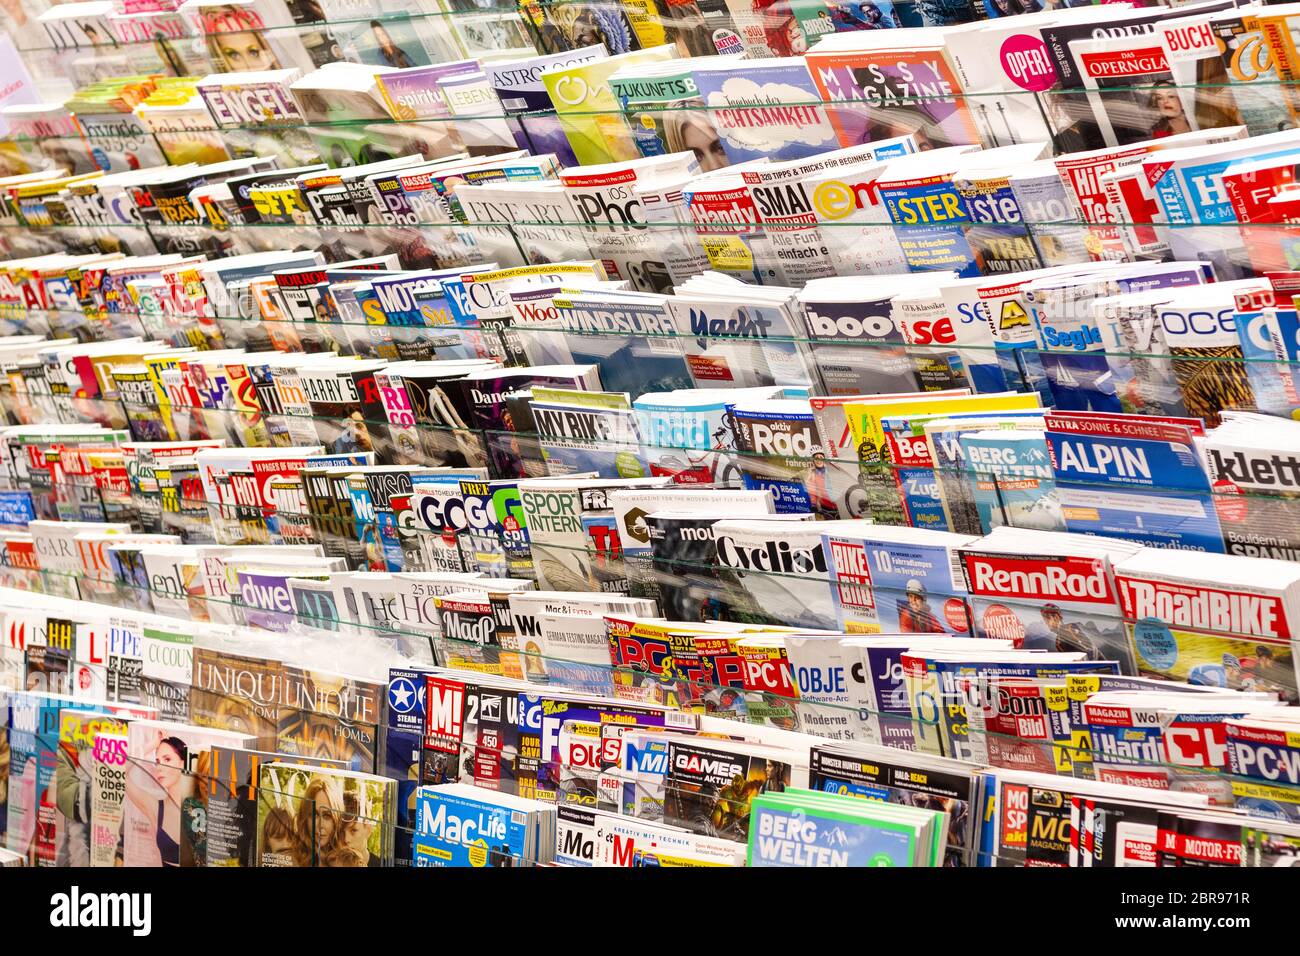 Schwechat, Austria. 2020/02/06. Magazines on display in a store at the Vienna Airport. Stock Photo